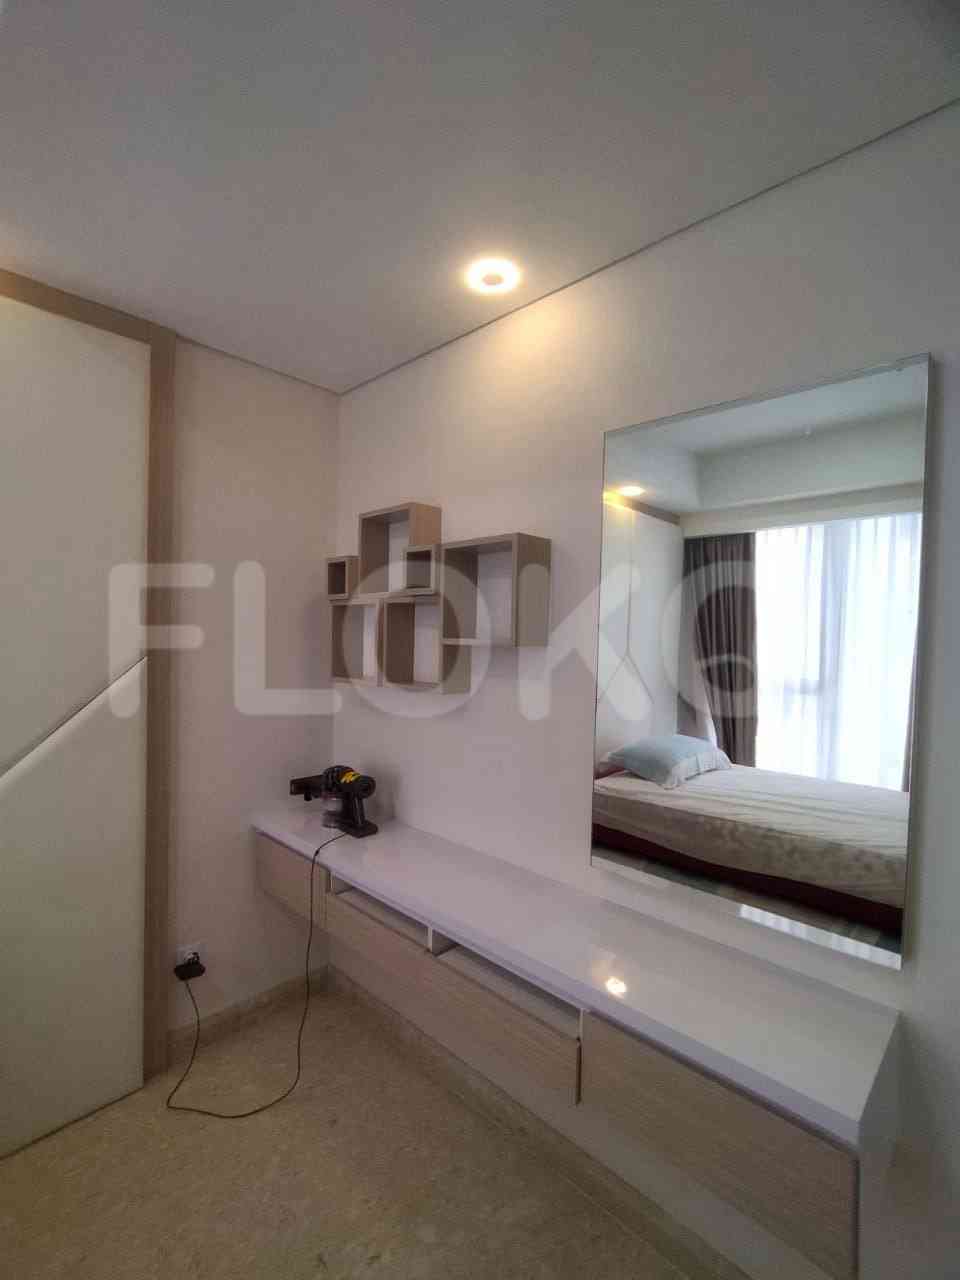 3 Bedroom on 25th Floor for Rent in Gold Coast Apartment - fka079 9